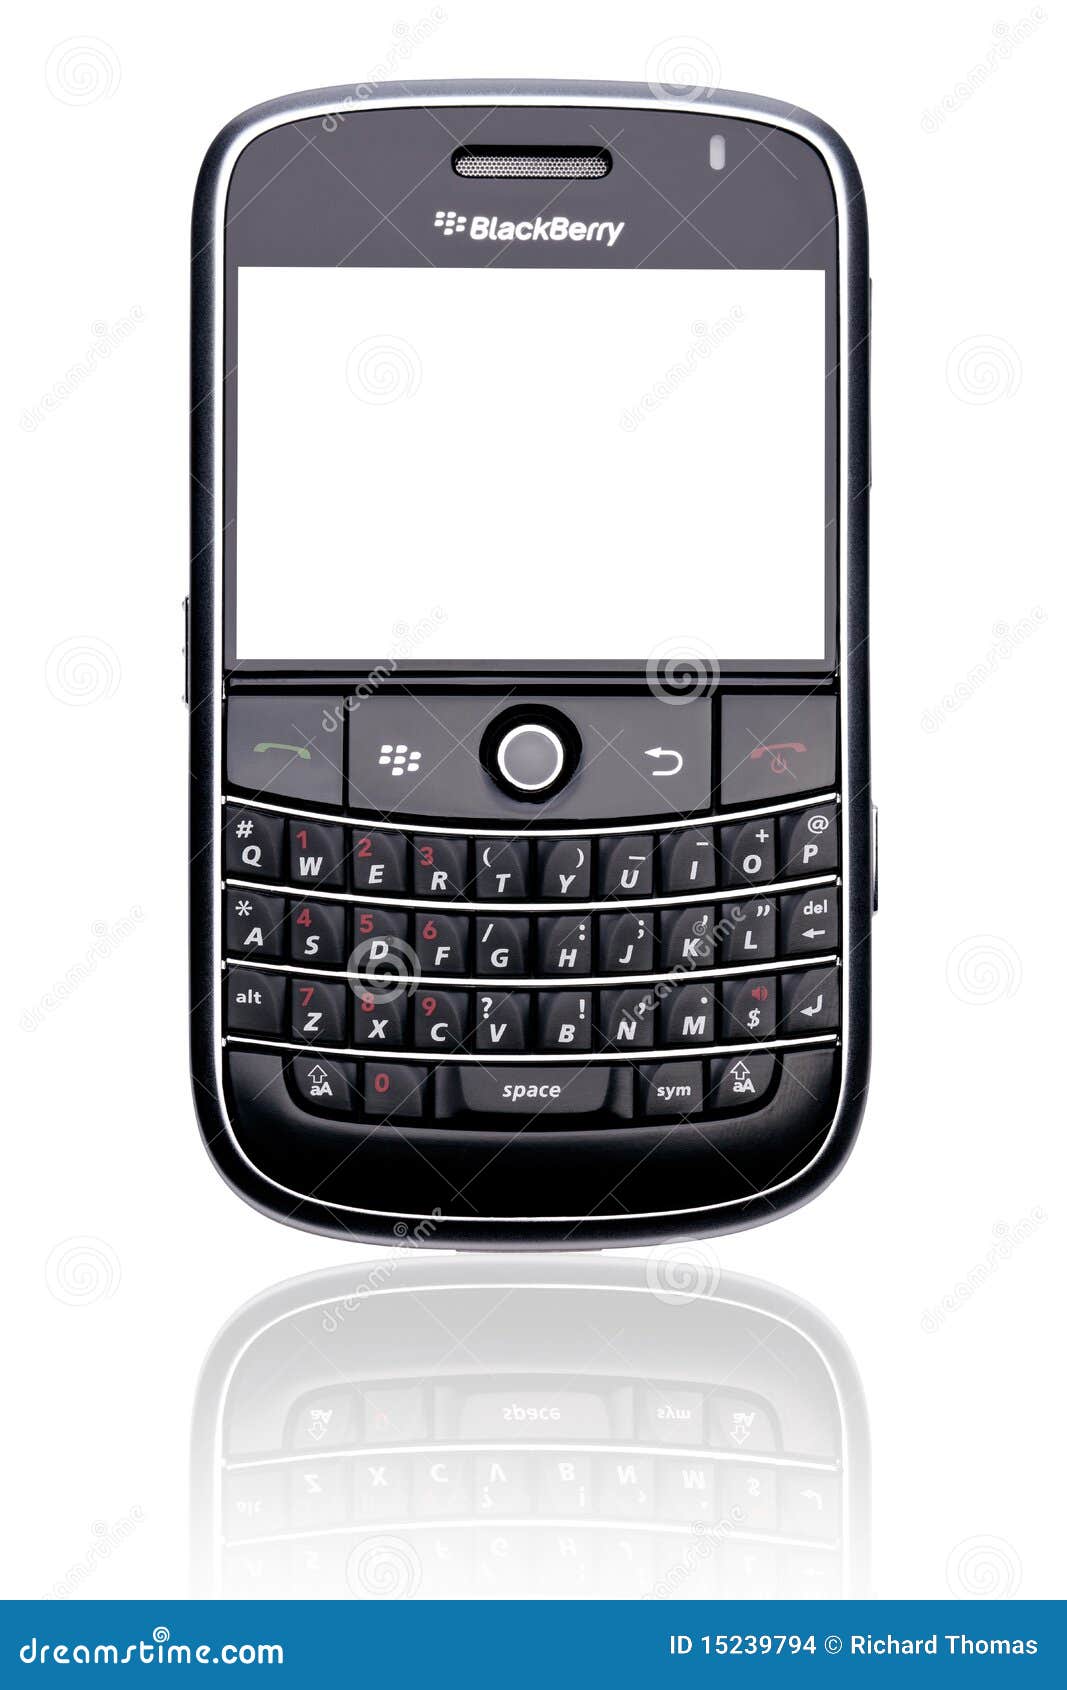 clipart for blackberry phone - photo #7